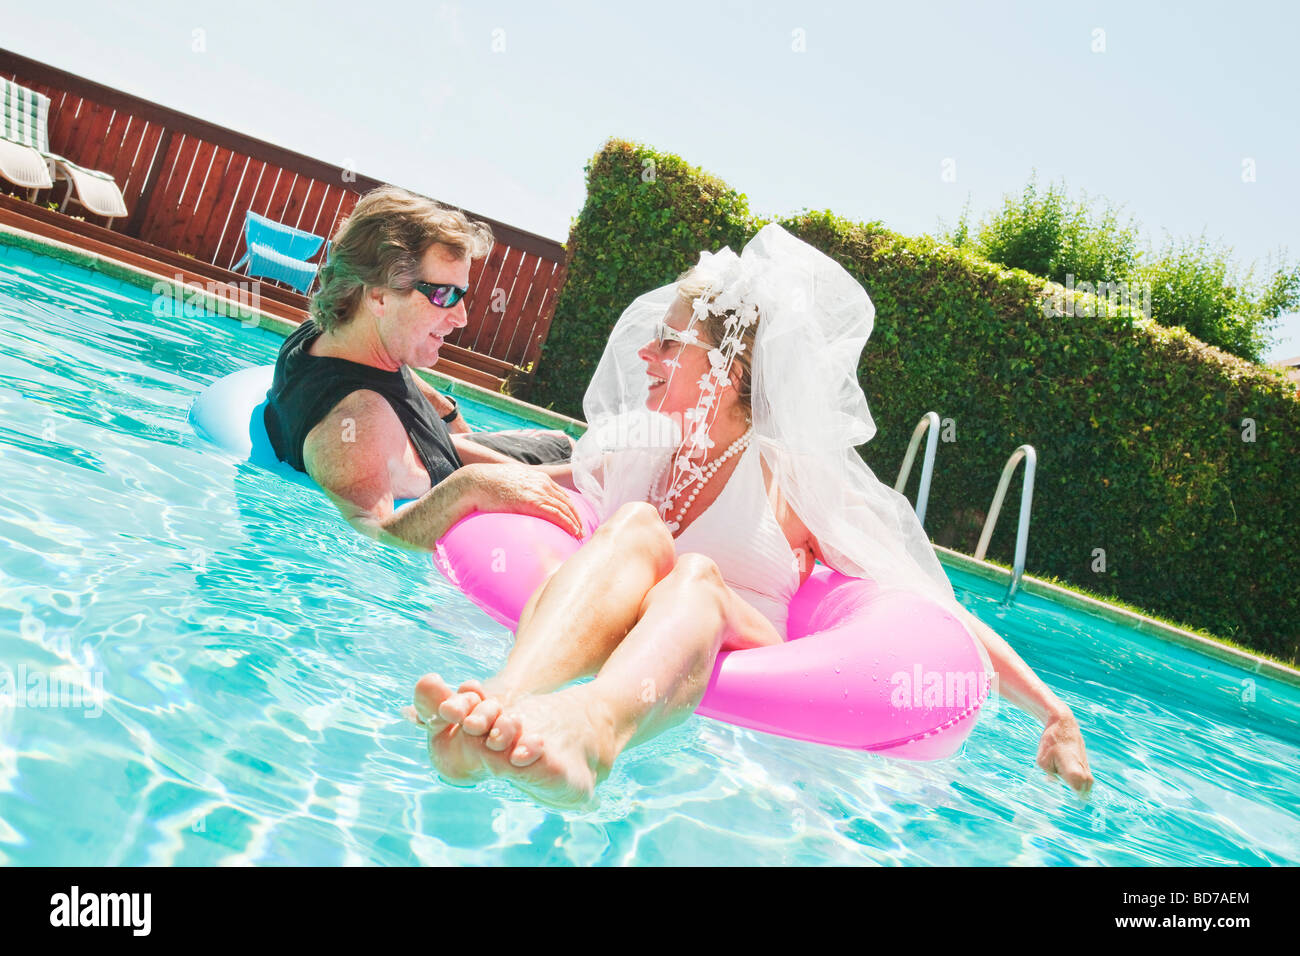 Bride and groom in swimming pool Stock Photo